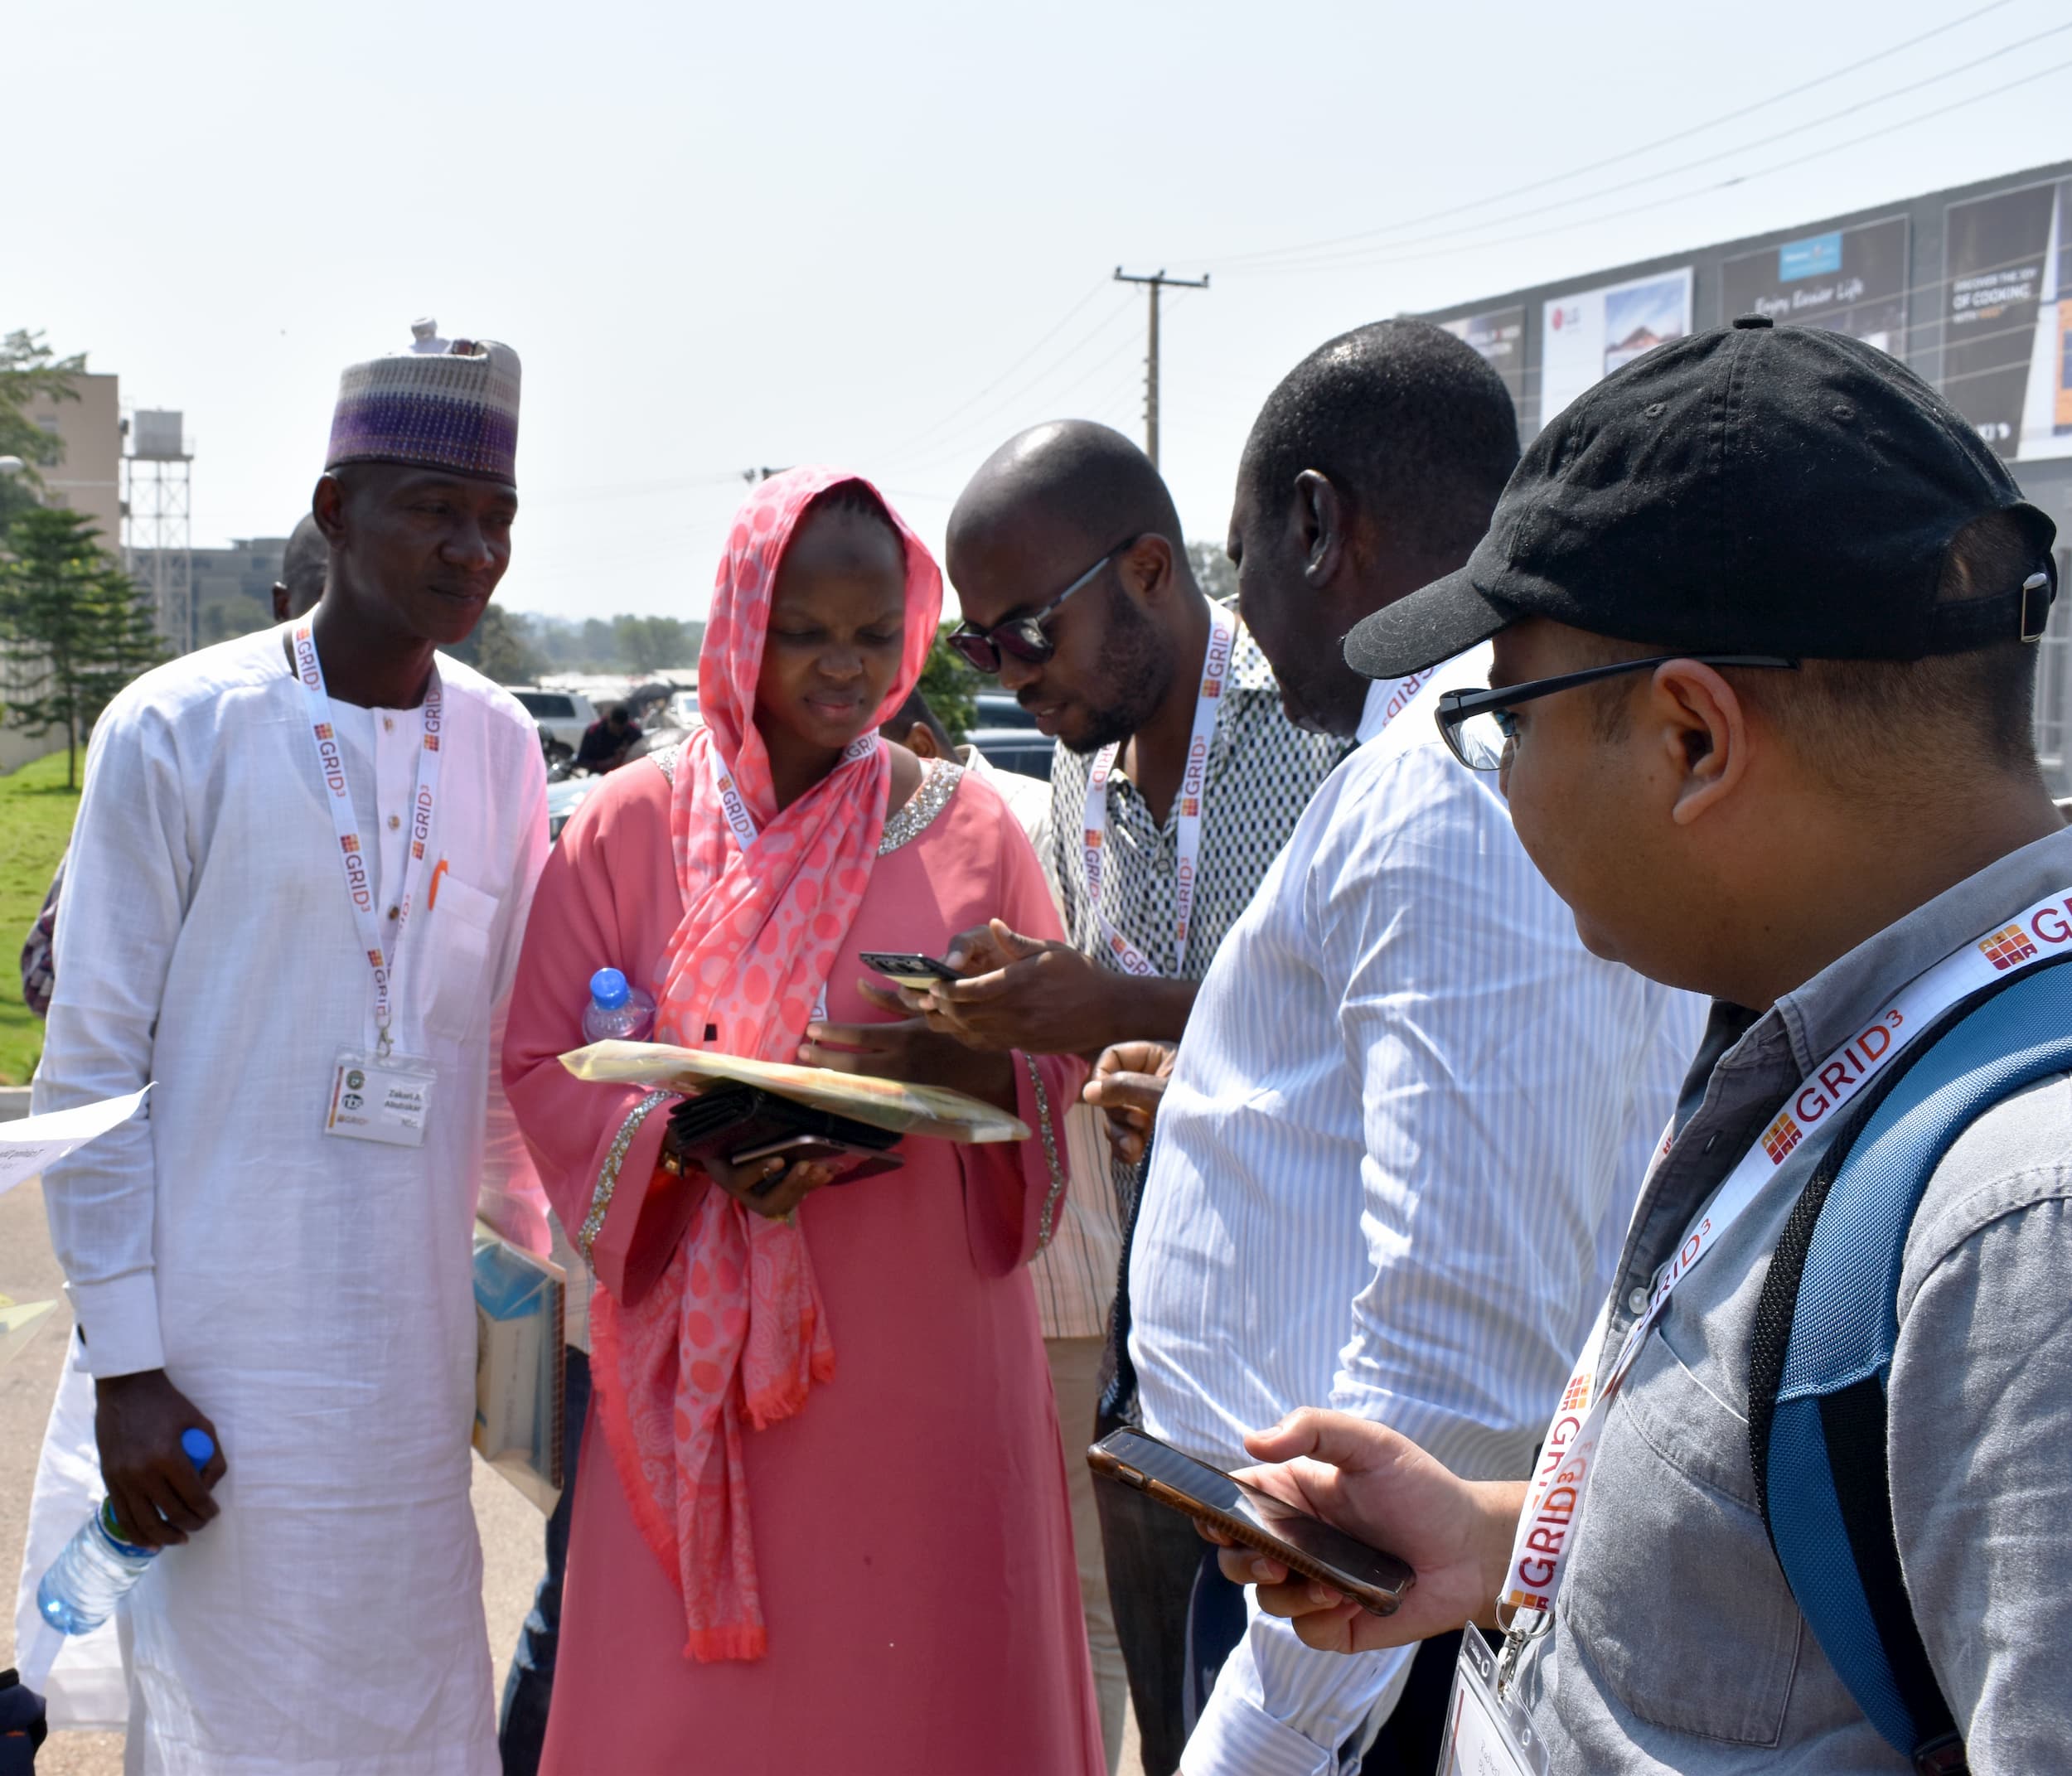 Representatives from Nigerian government and non-government agencies in the field, using skills learnt from workshops on gridded population survey sampling methodology.